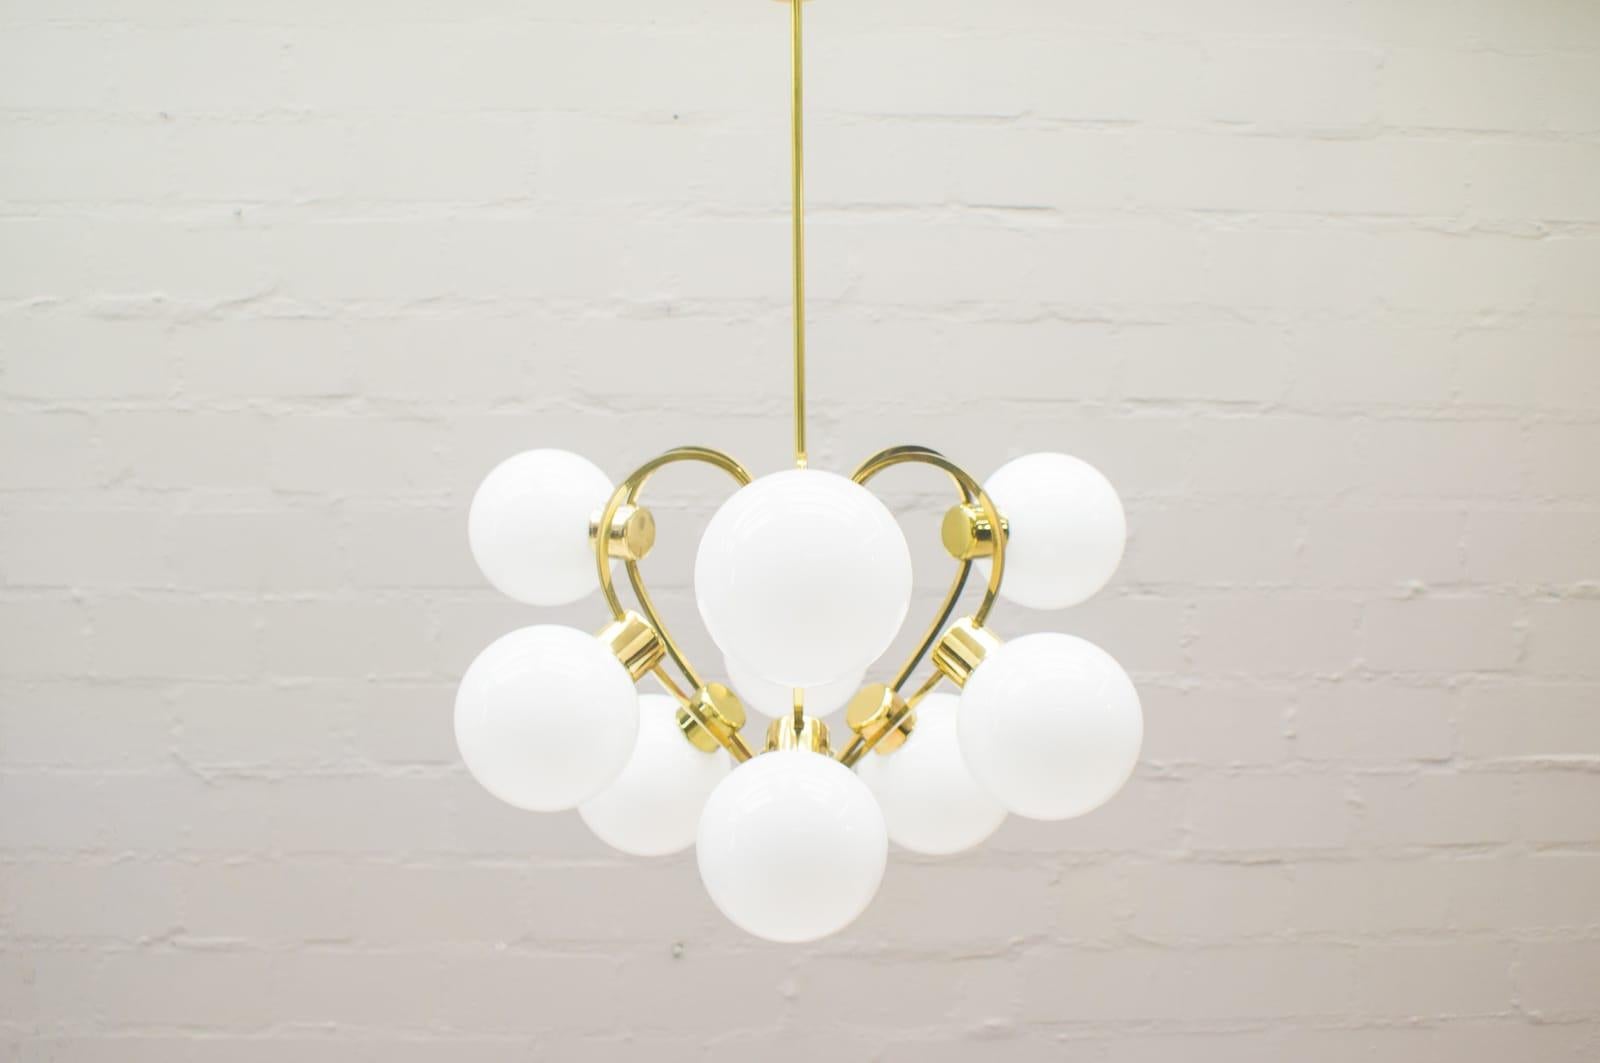 This piece is a golden 9-arm orbital Lamp with white opaline glass beads from the 1960s. It has an E14 socket.

Very elegant and decorative.